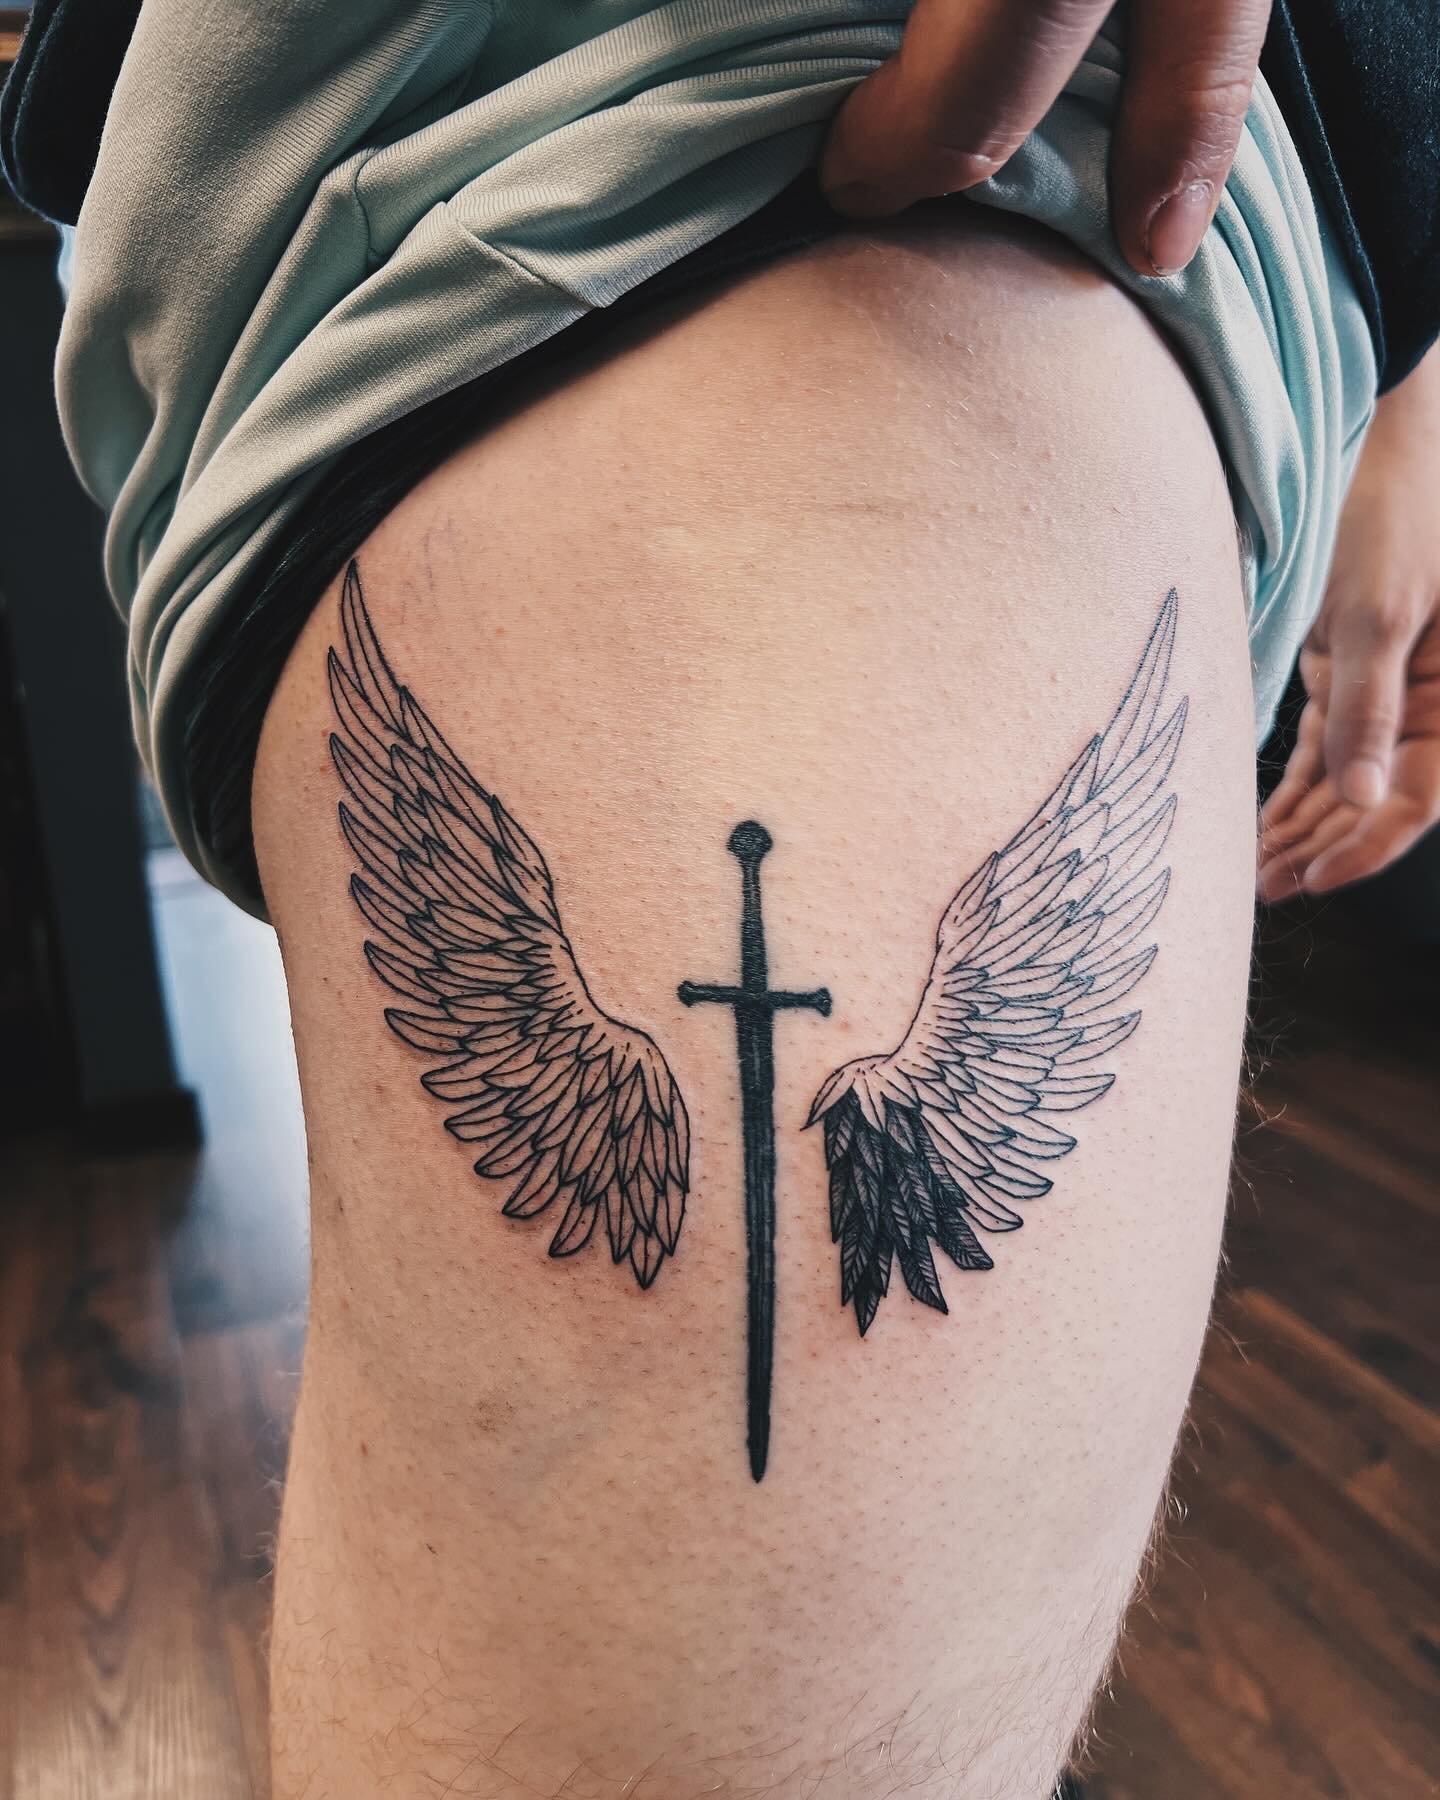 Sword for the husband @nickfriendt was second tattoo I did on another person and yesterday we got to start on the wings he wanted on the left/right of it. :)
.
#narsil #swordtattoo #angelwingstattoo #learning #growing #tattooapprentice